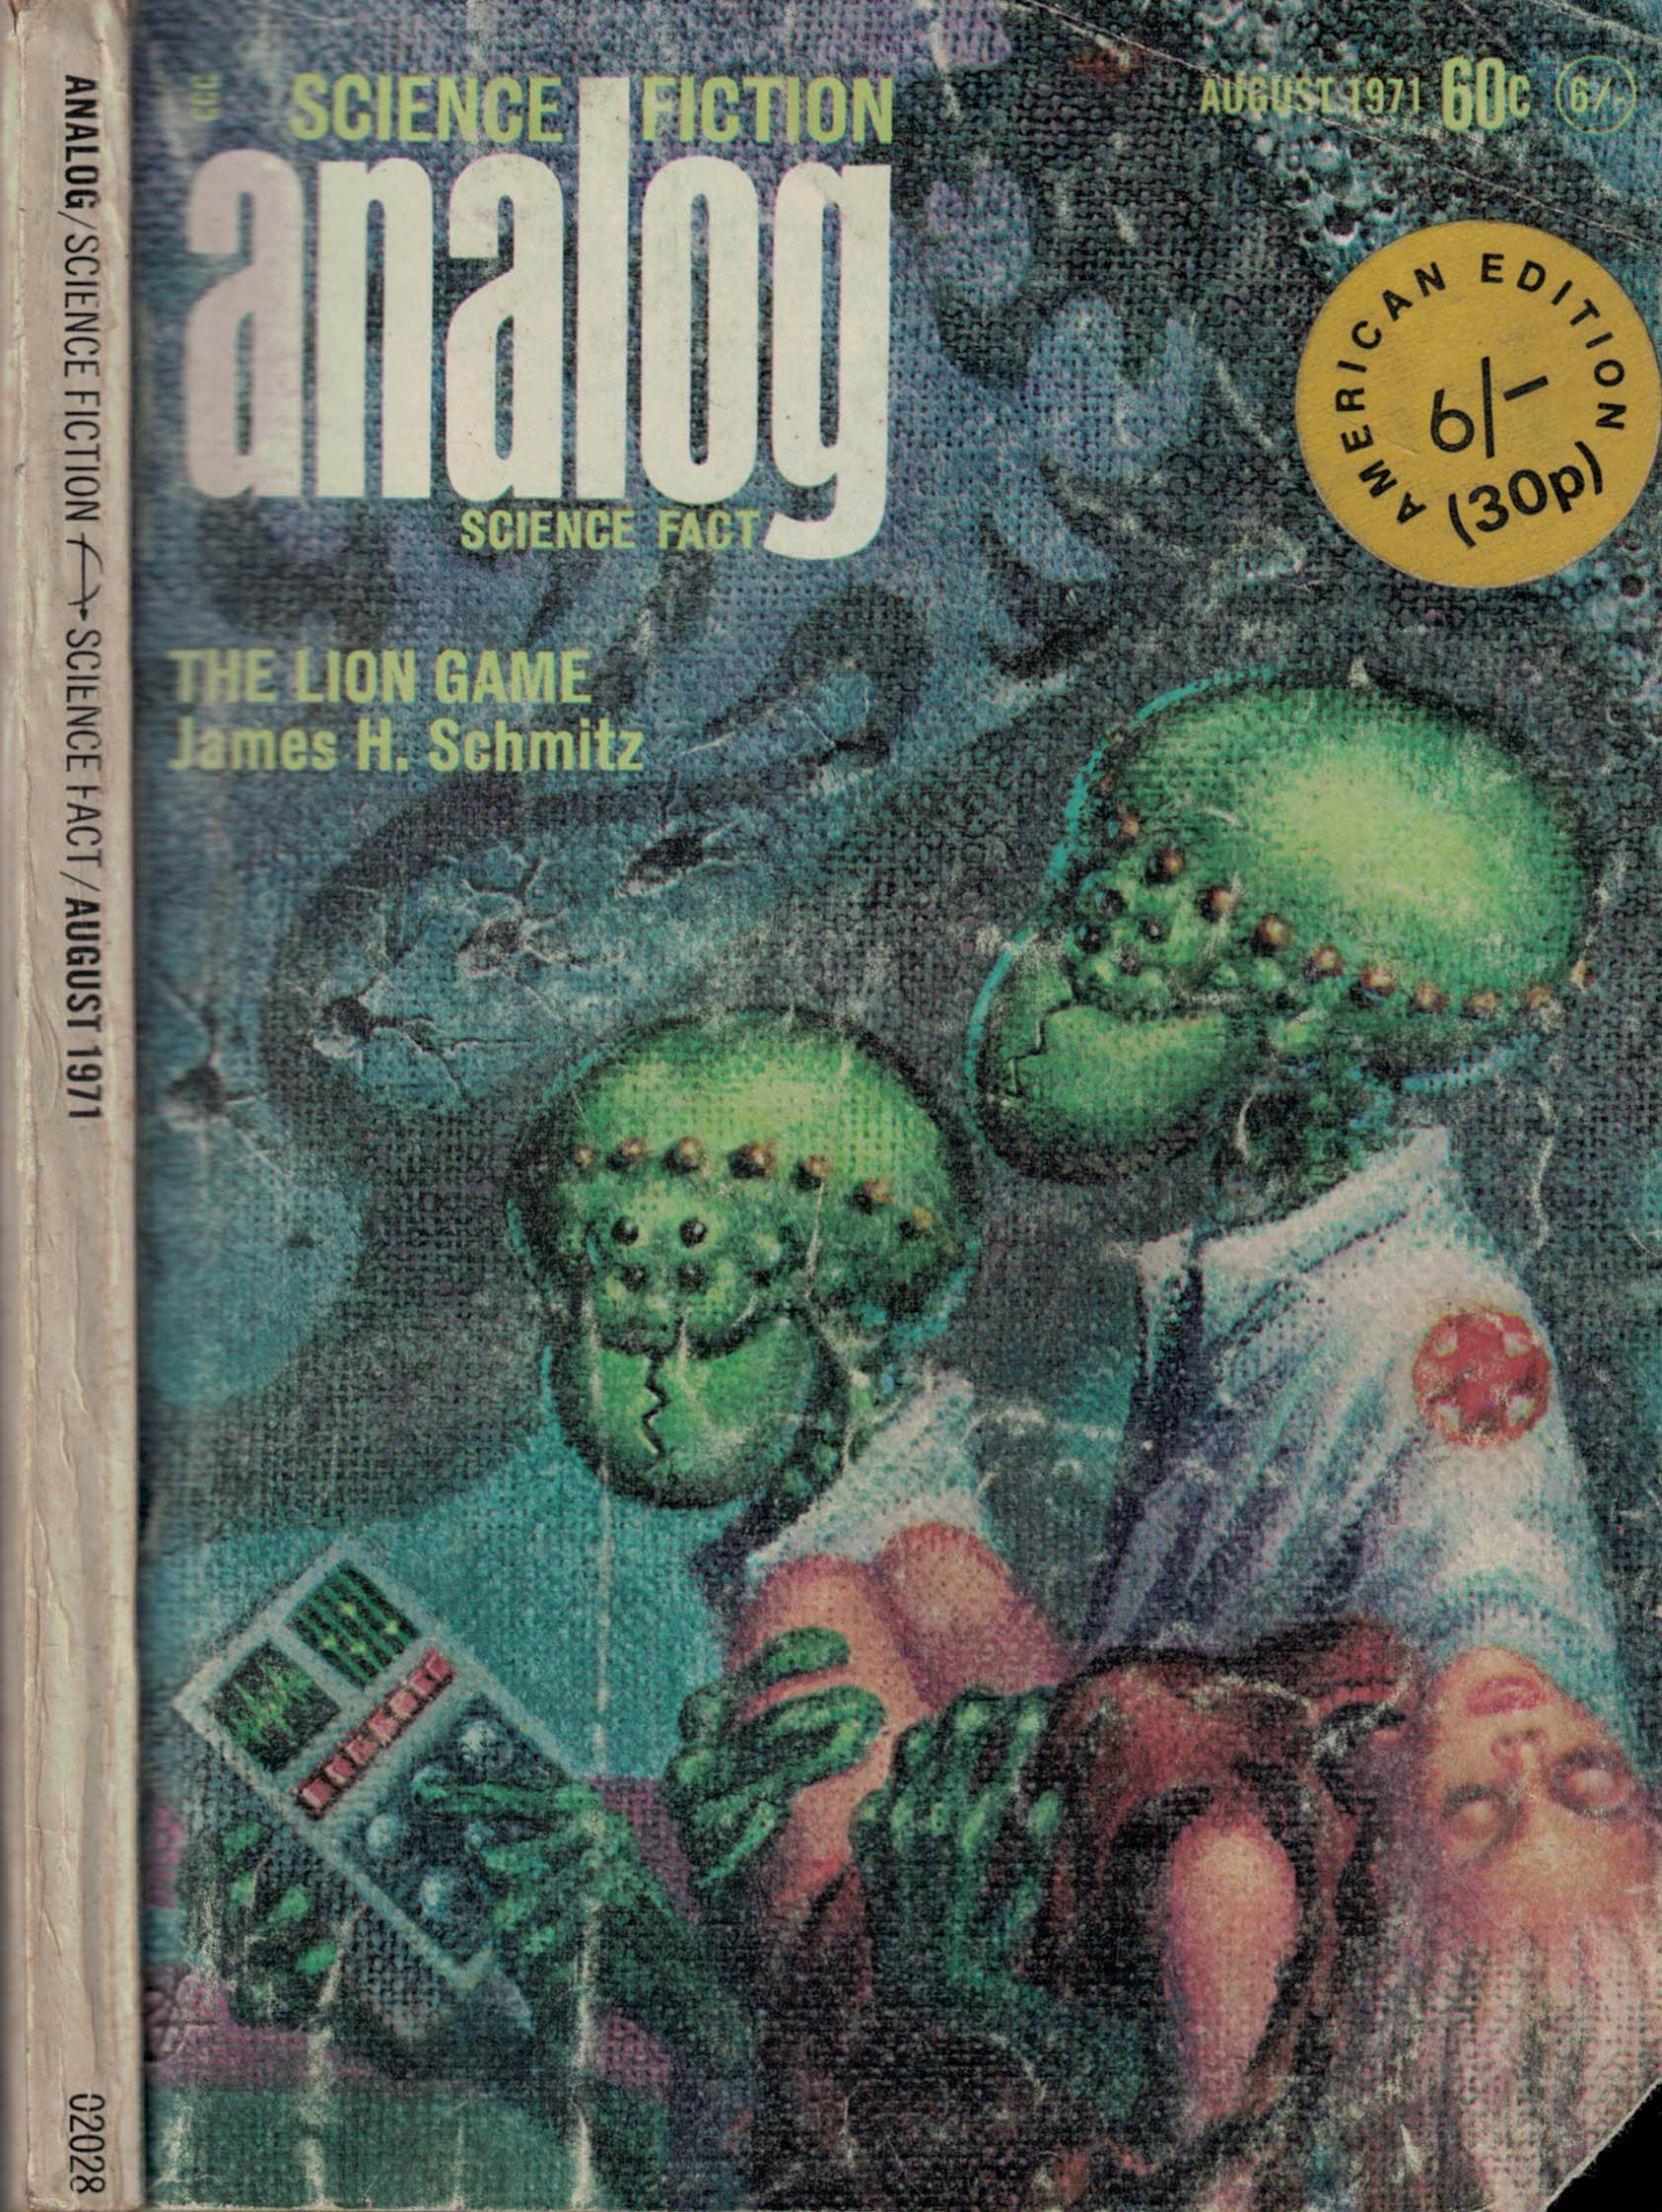 Analog. Science Fiction and Fact. Volume 87, Number 6. August 1971.